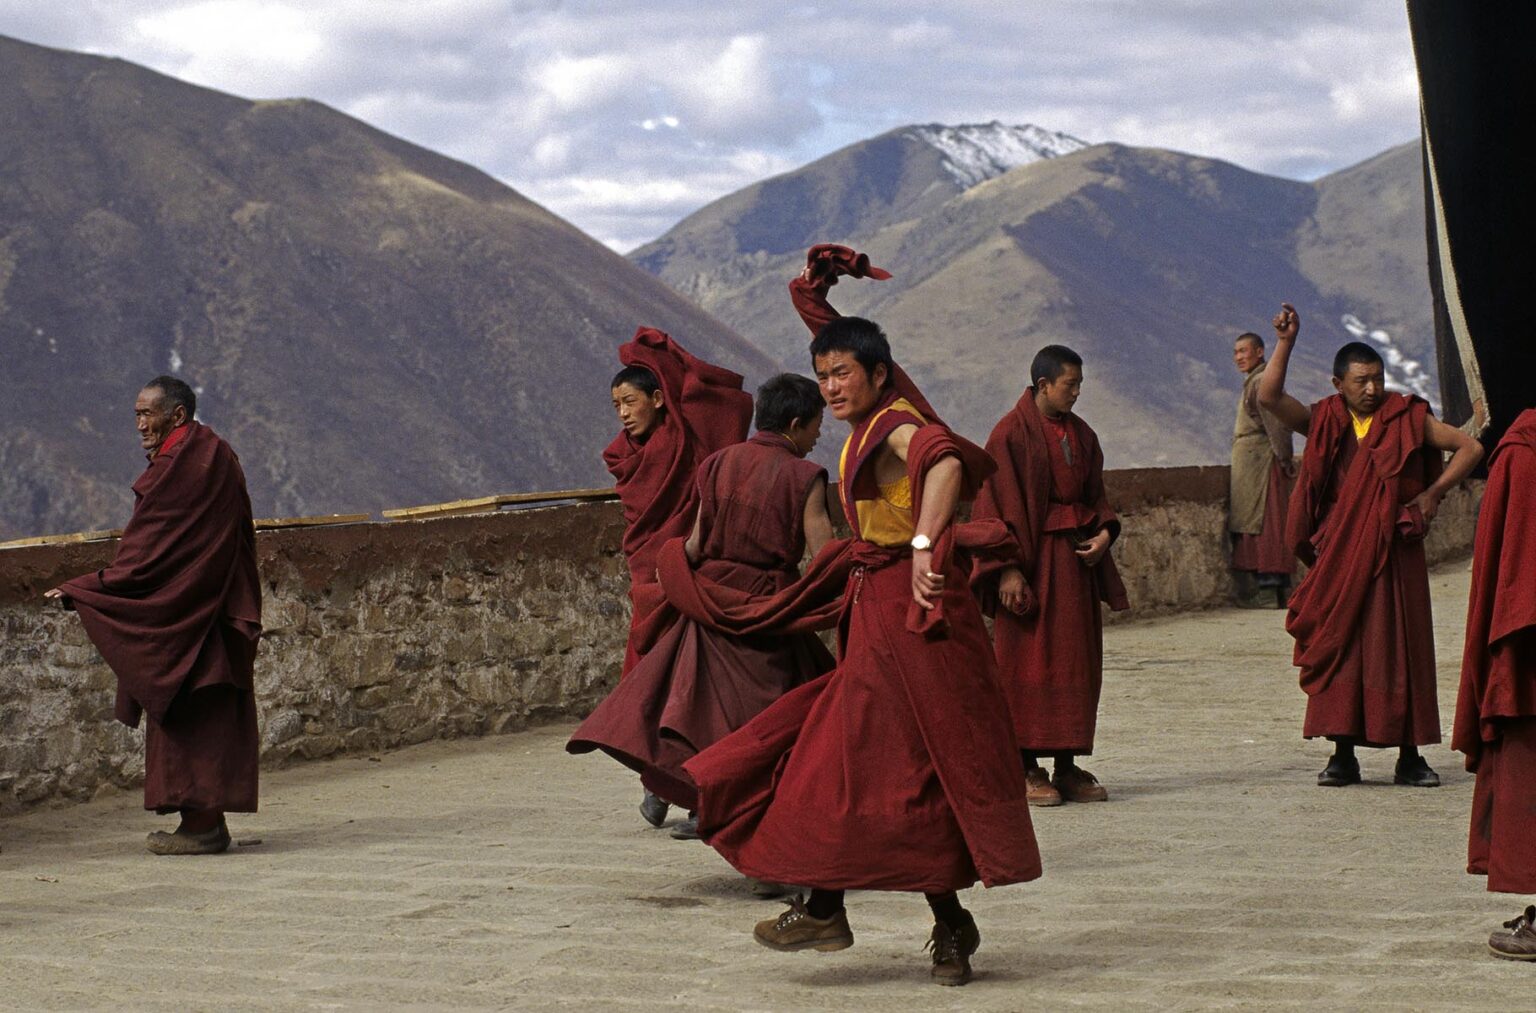 MONKS of the KAGYU SECT of TIBETAN BUDDHISM practice their ceremonial dances at DRIGUNG MONASTERY - TIBET